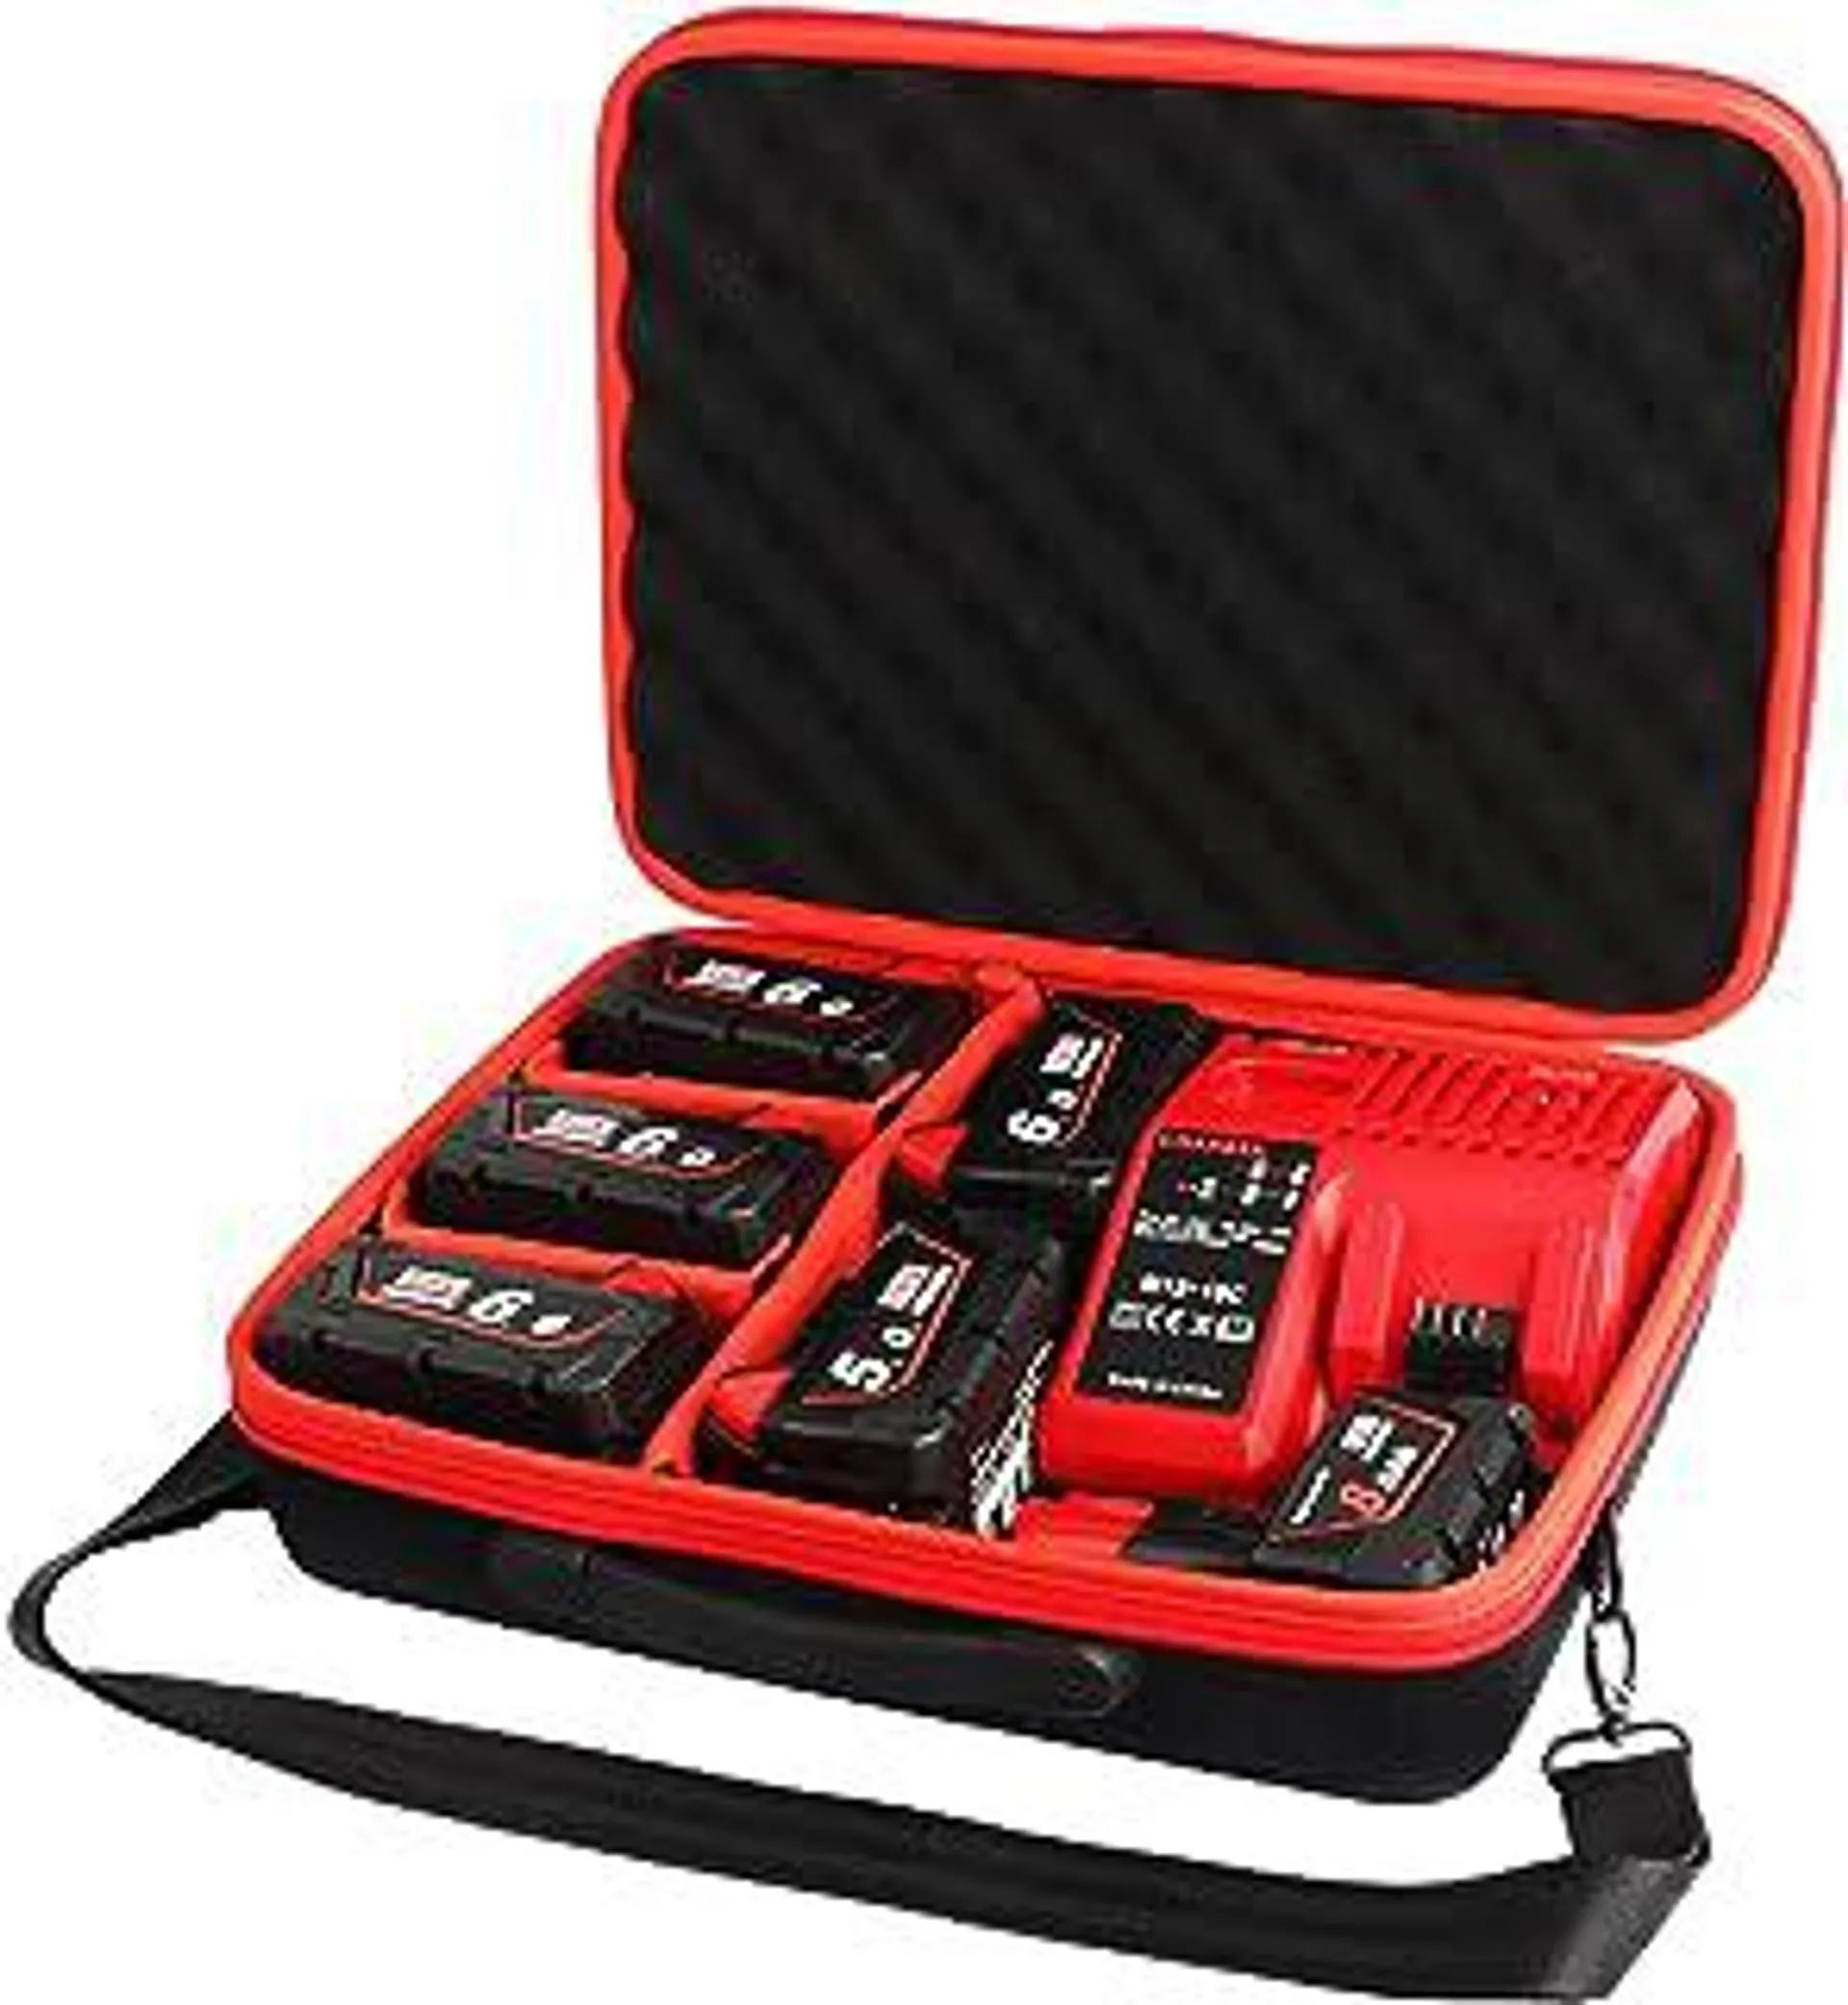 Extra Large Hard Battery Storage Holder Case for Milwaukee M12 M18 Battery and Charger,Tool Battery Carrying Box,Holds 18V 12V 2.0/5.0/6.0/9.0/12.0-Ah Battery with 10 Adjustable Dividers